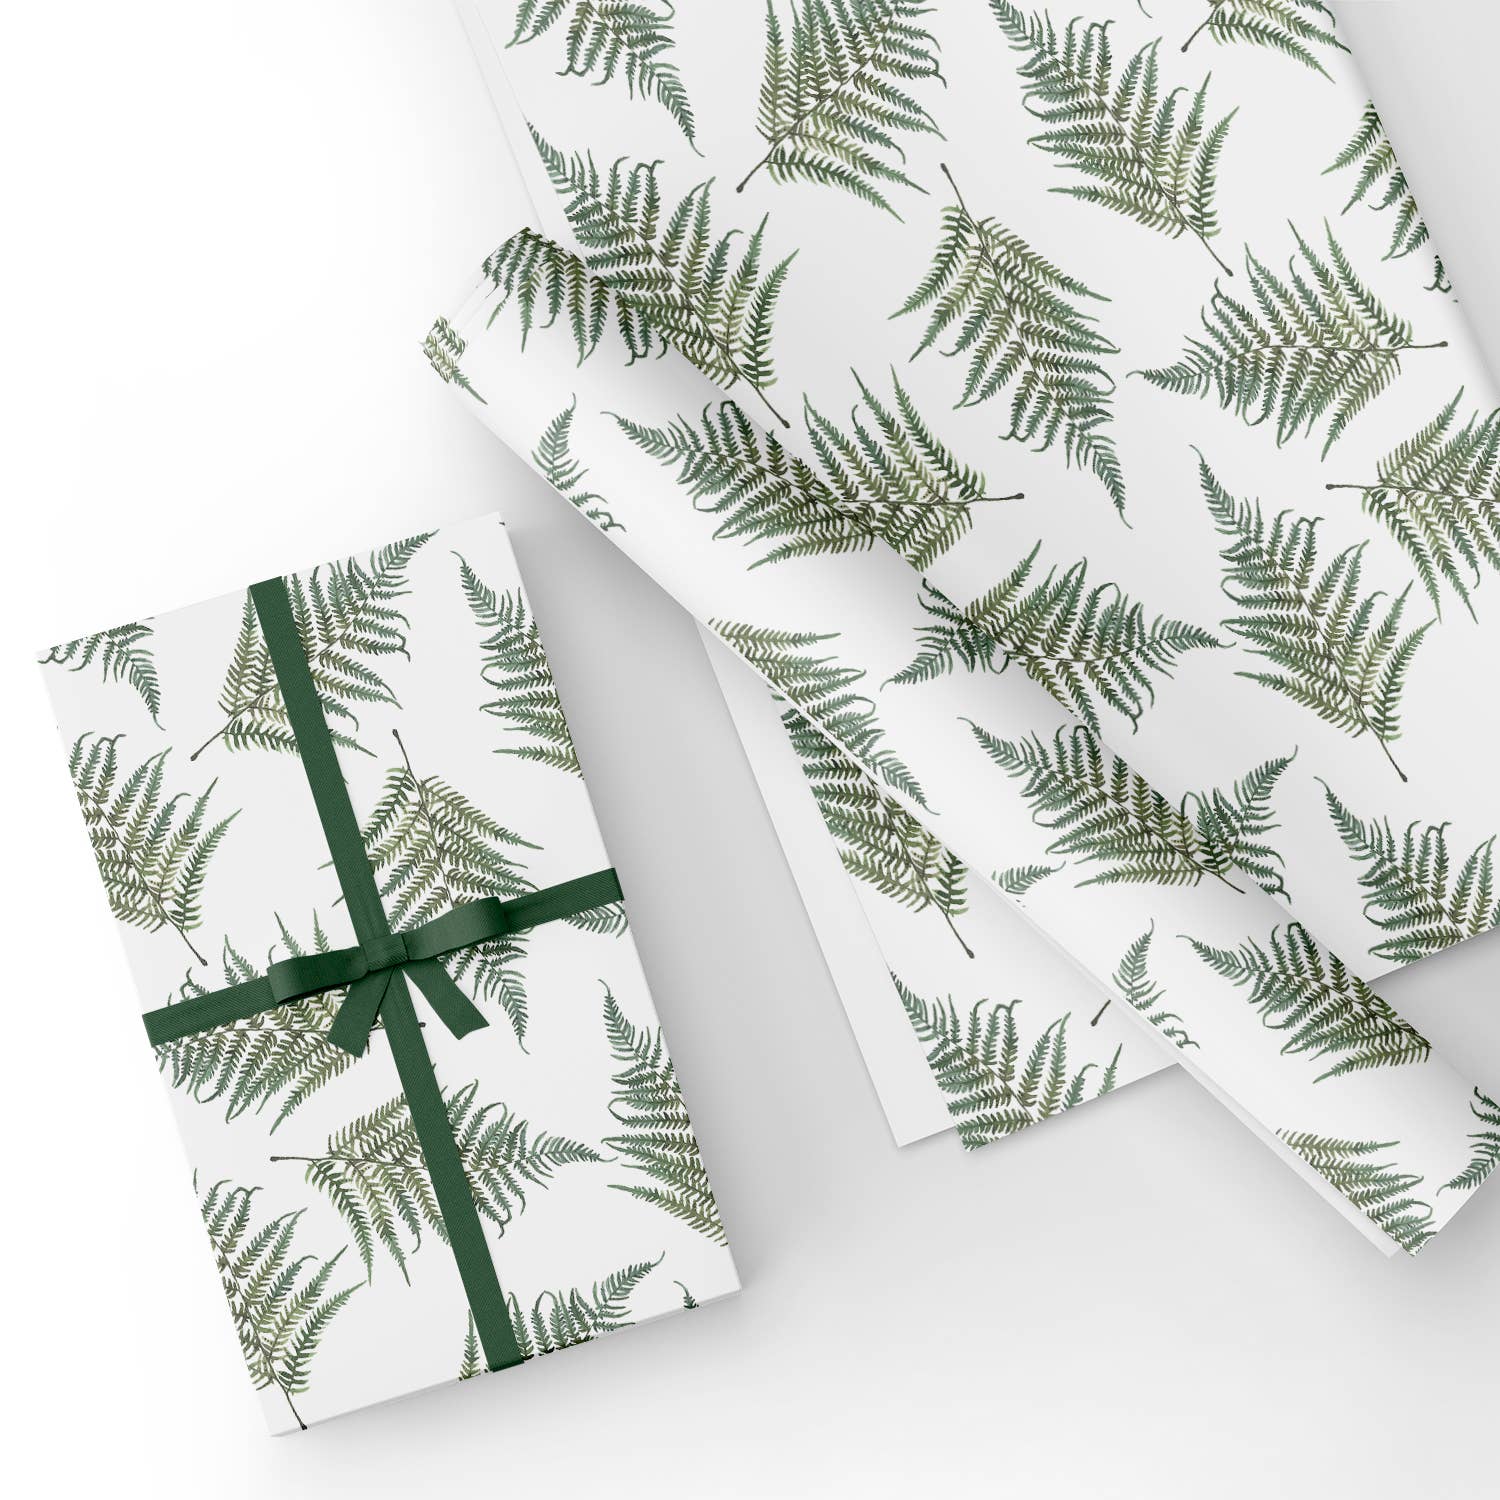 Tropical Fern Flat Wrapping Paper Sheet Wholesale Wraphaholic